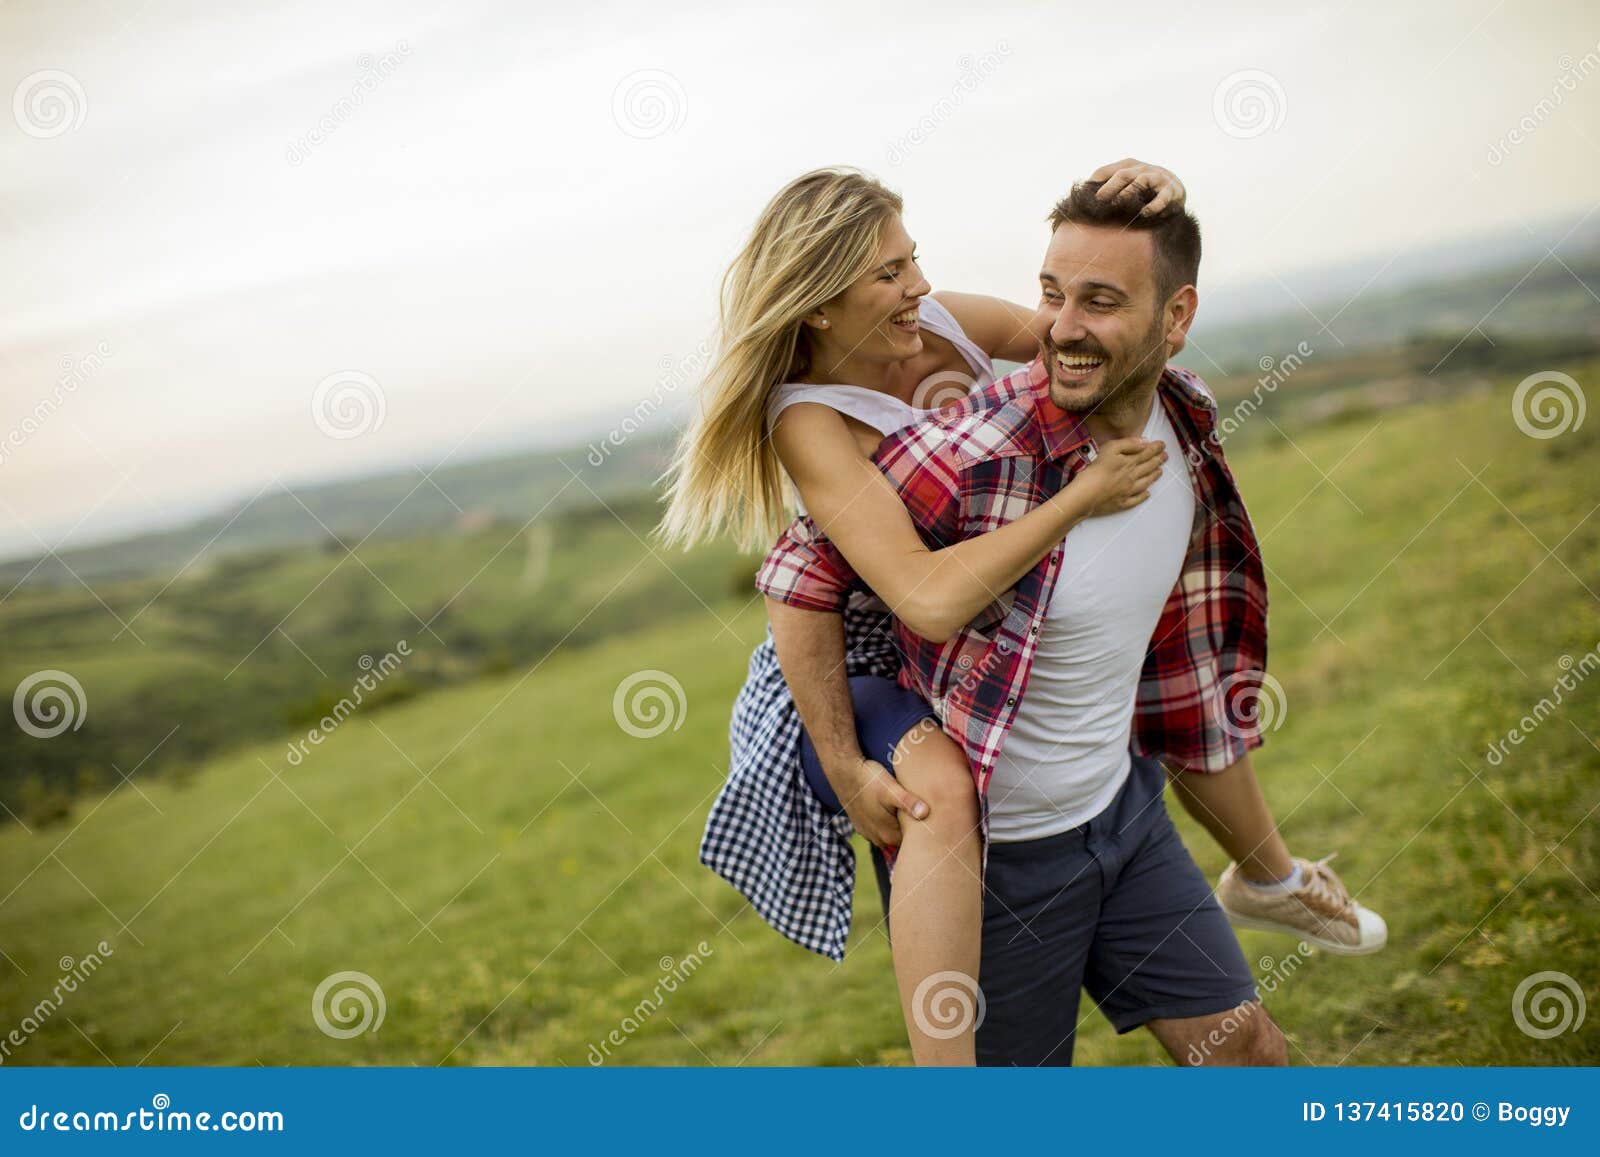 Loving Couple Having Fun In The Spring Nature Stock Photo Image Of